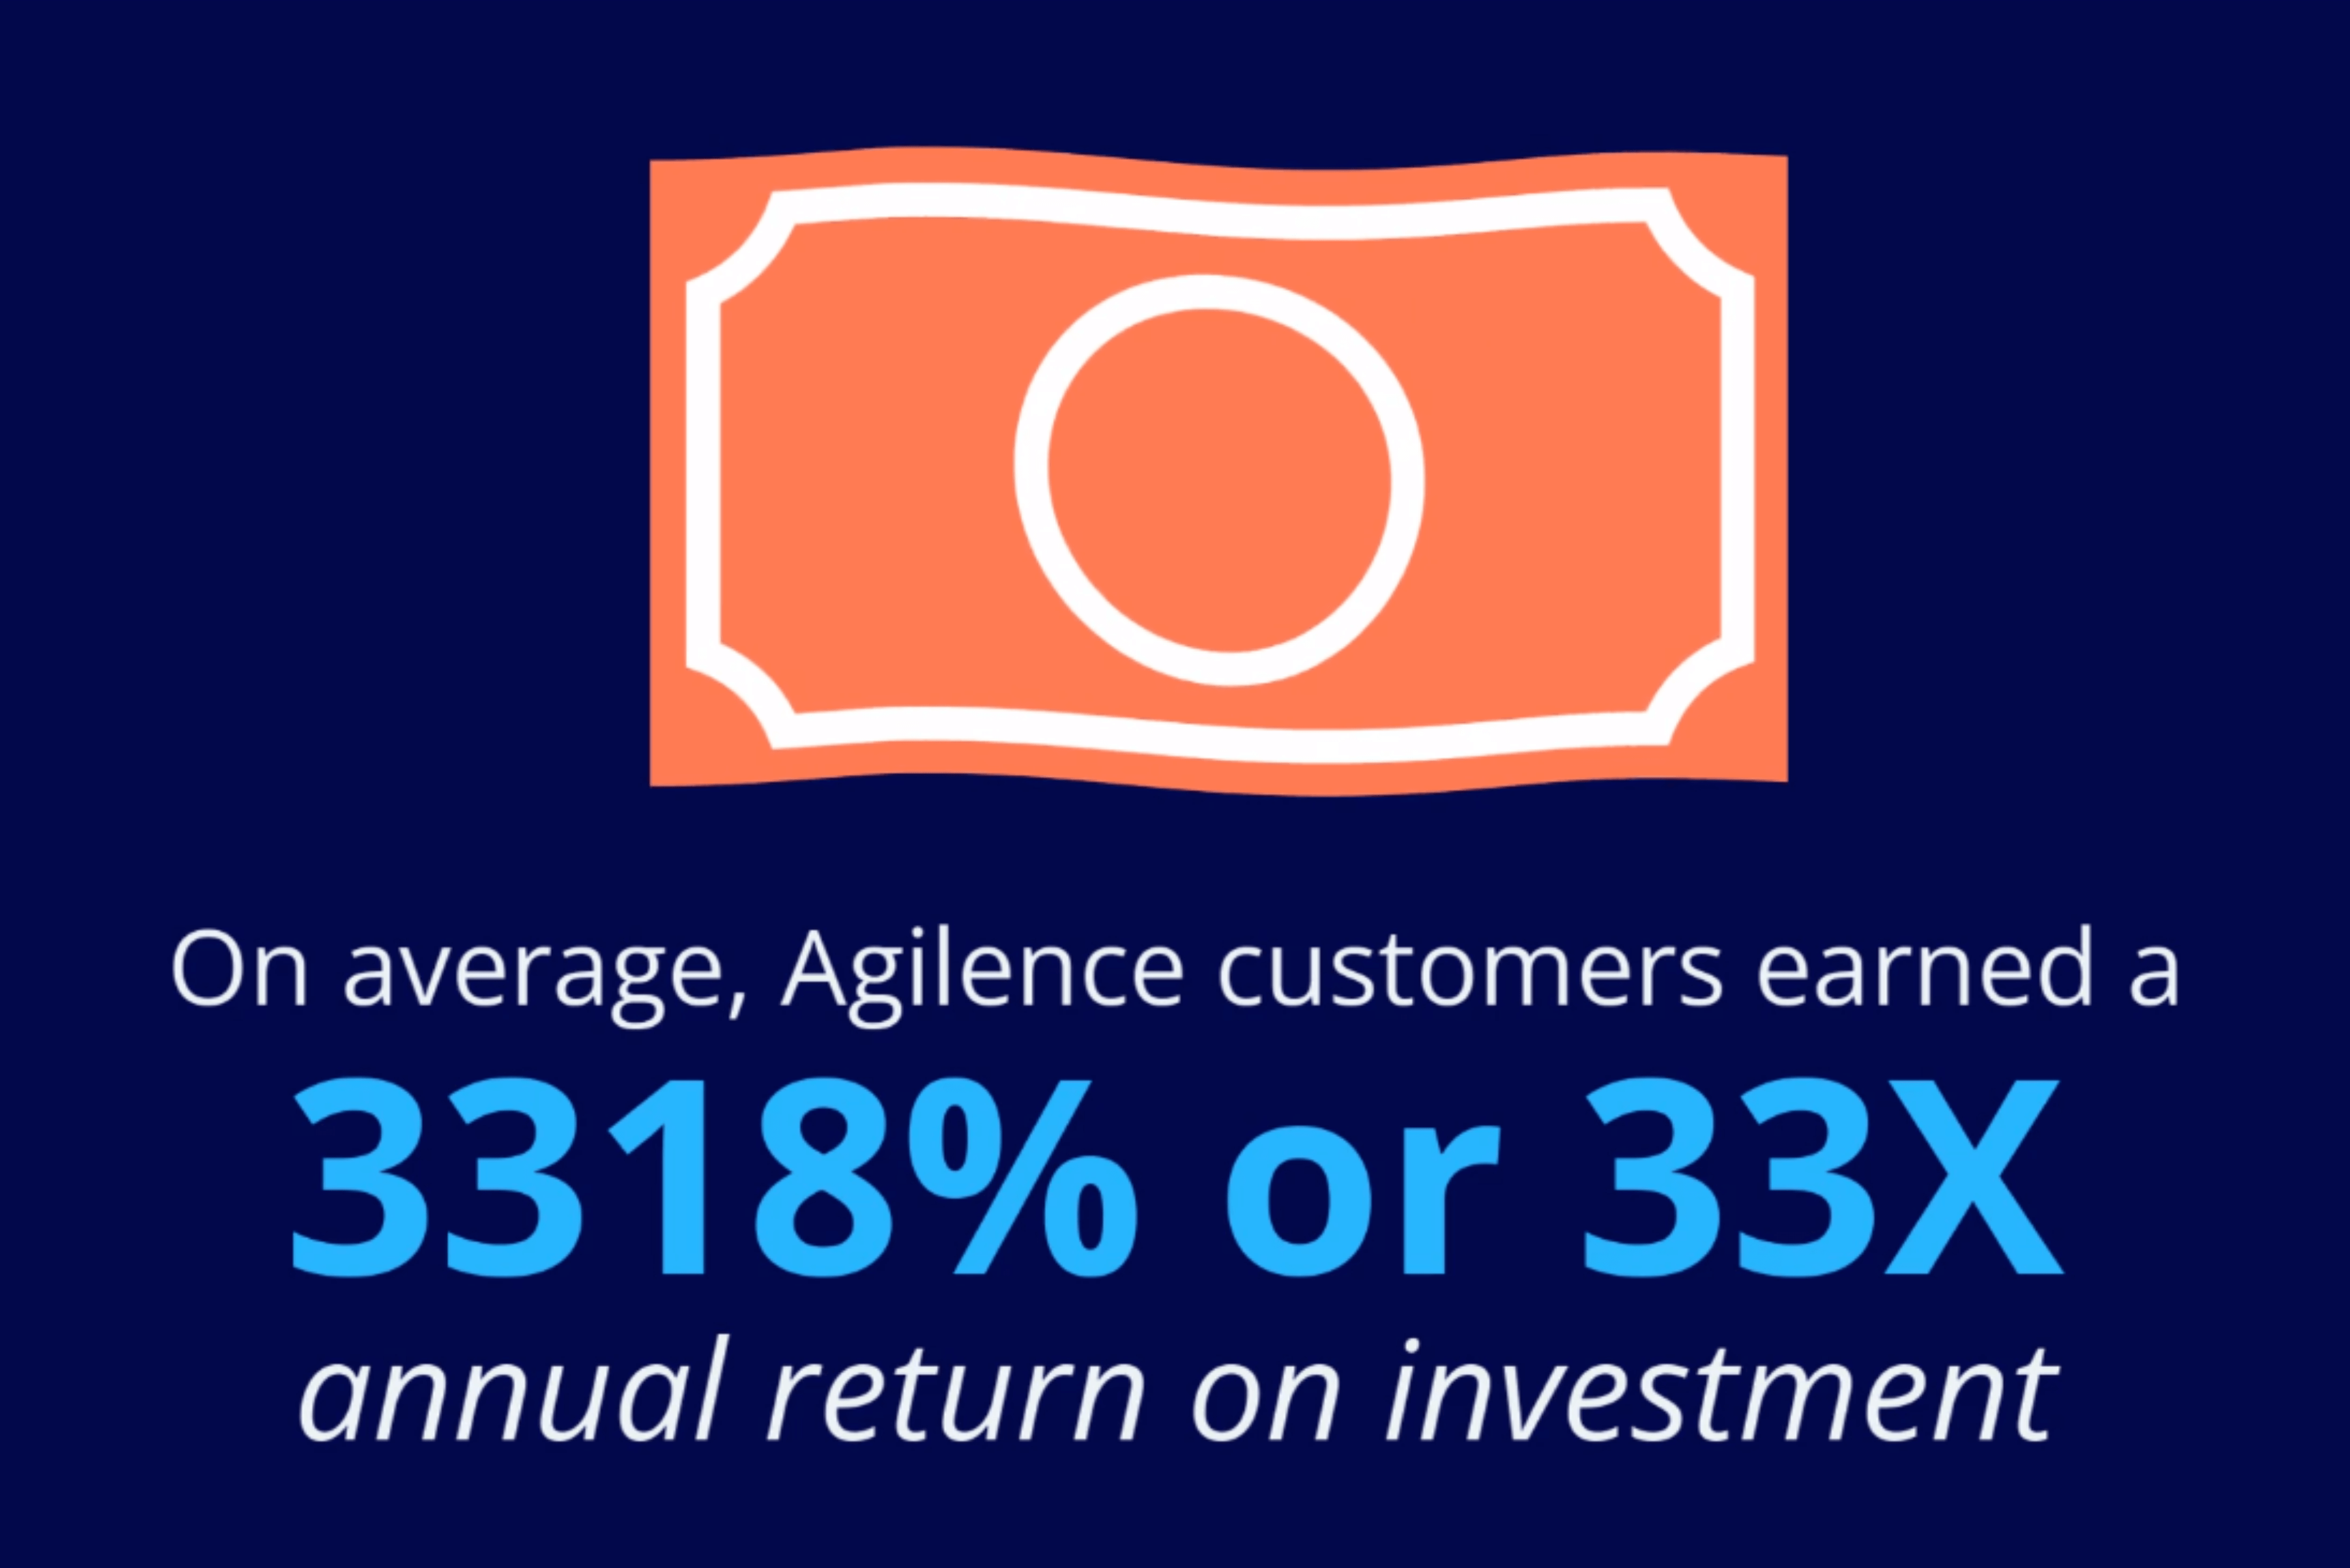 Agilence Delivers an Average 3,318% Annual ROI for Customers